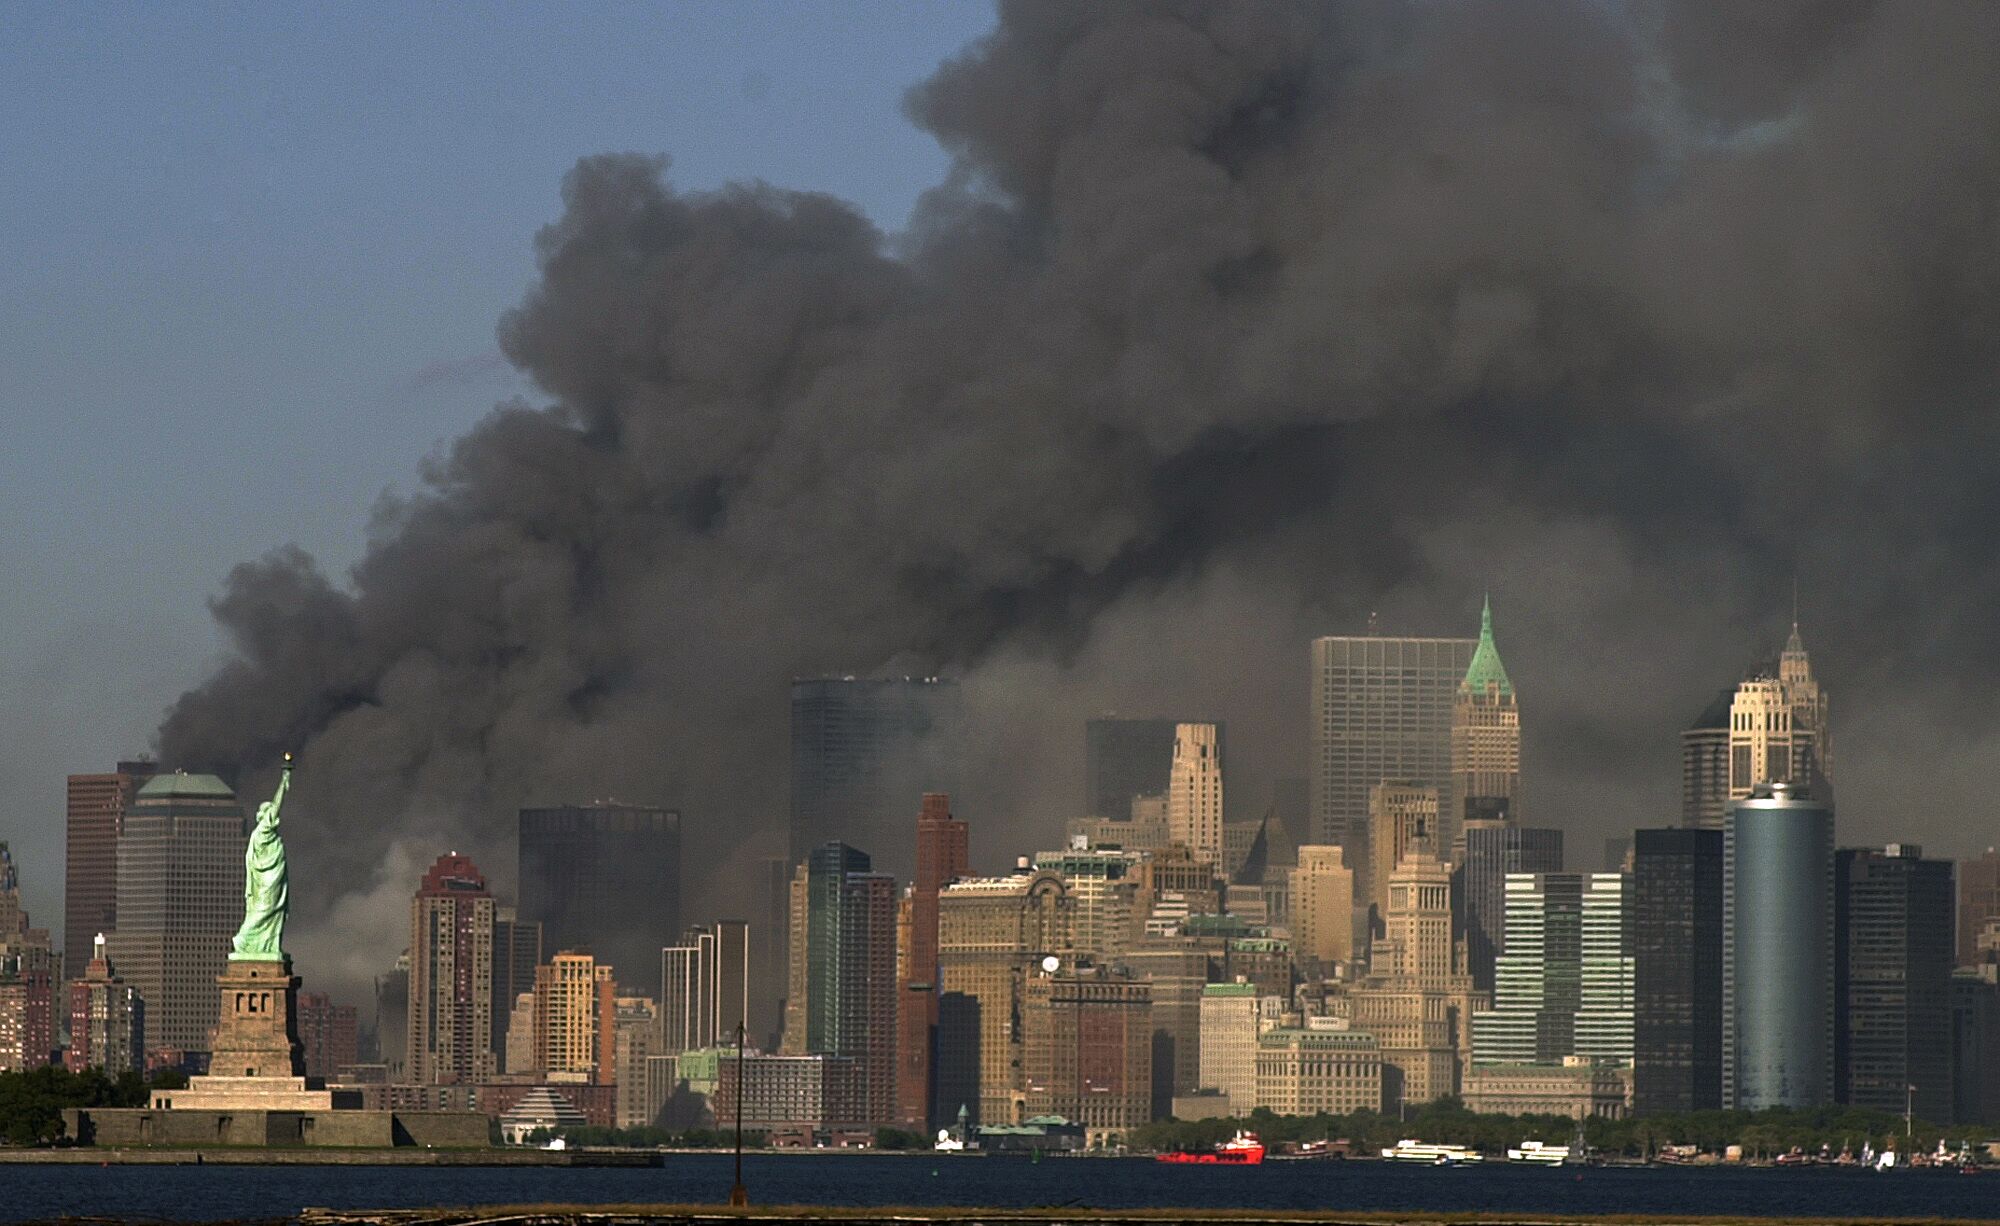 With the Statue of Liberty at left, the smoking Manhattan skyline after the attacks